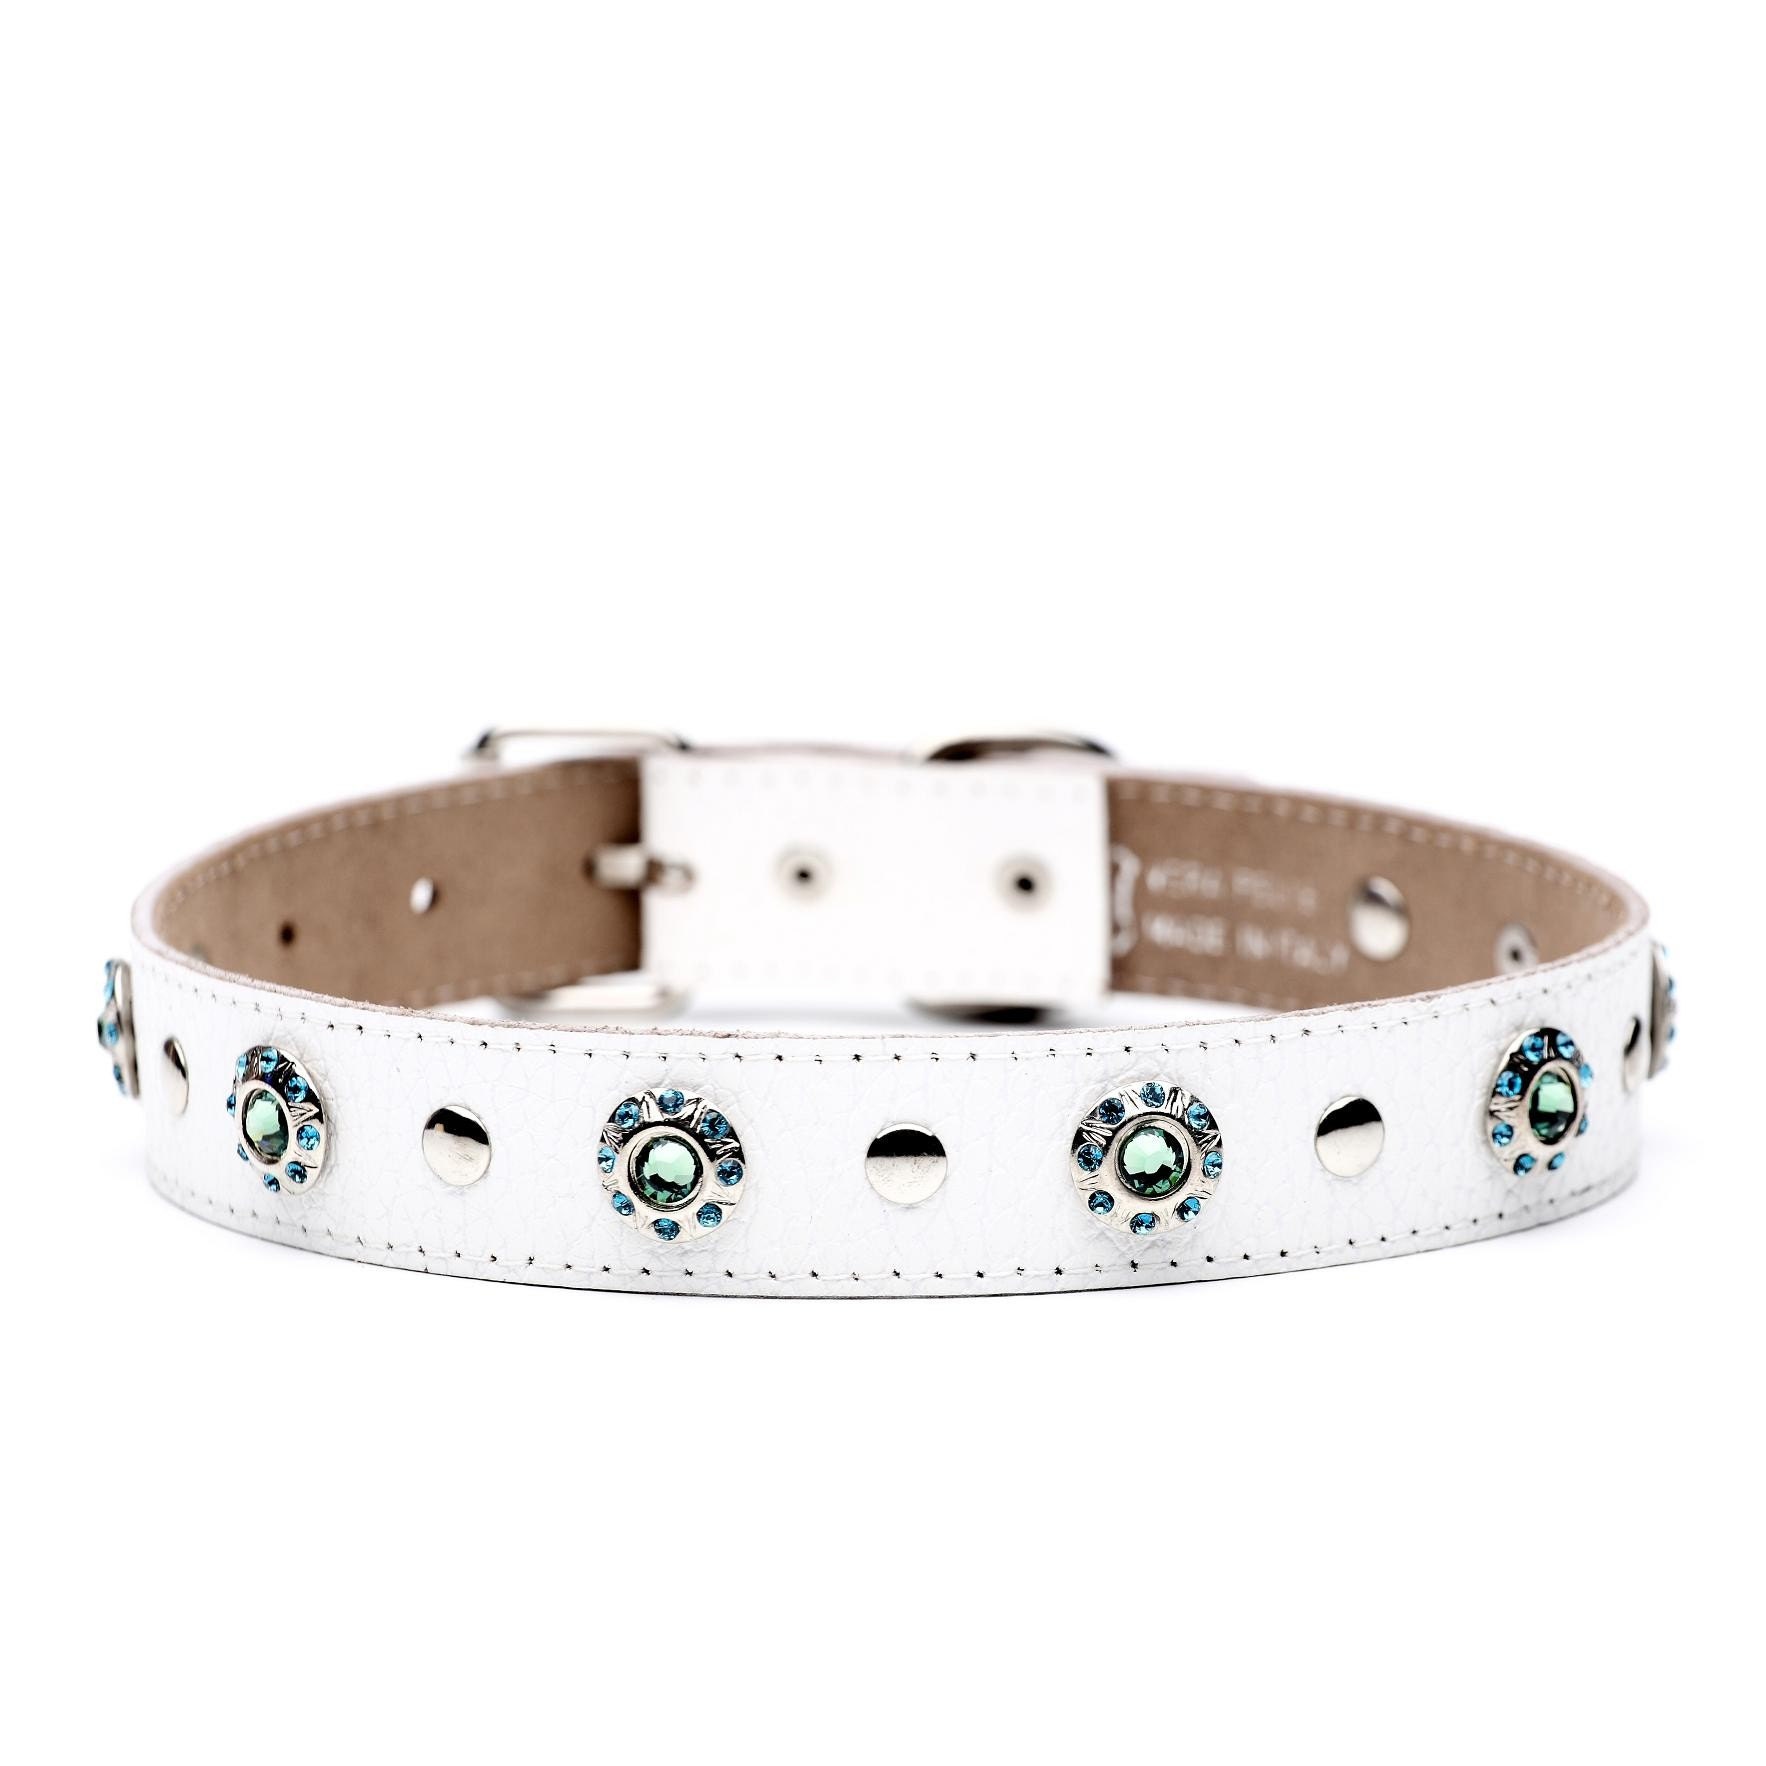 Cristyle handcrafted dog collars - NOW SHIPPING 4 FREE